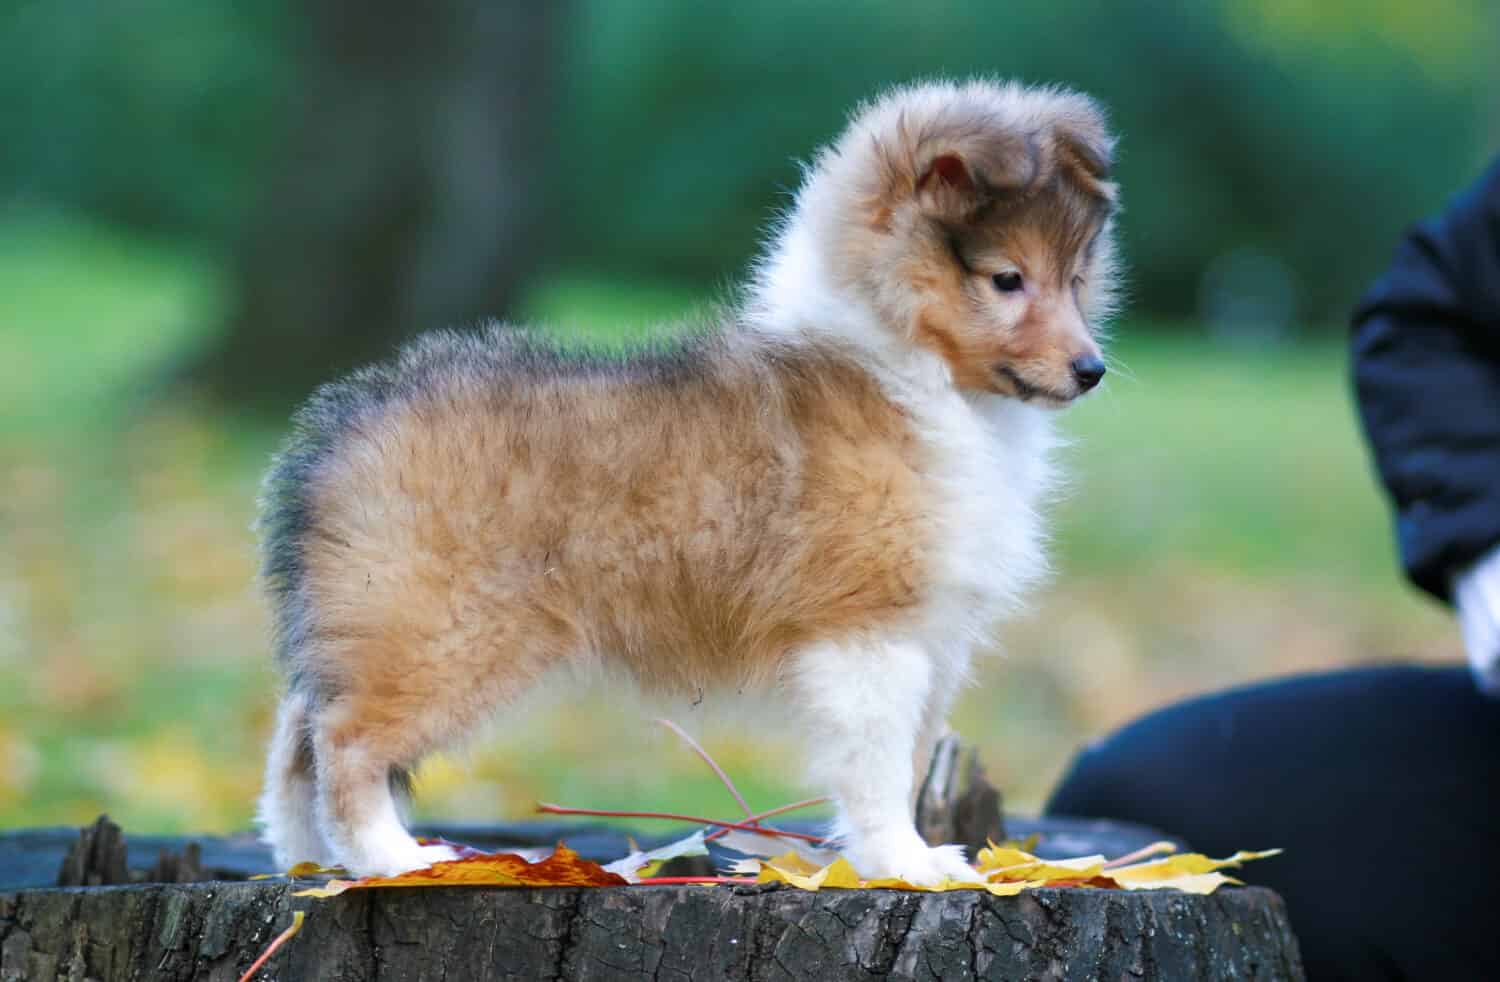 Stunning nice fluffy sable white shetland sheepdog puppy, sheltie standing outside on stump on a sunny autumn day. Small, little cute collie dog, lassie portrait in autumn time with green background